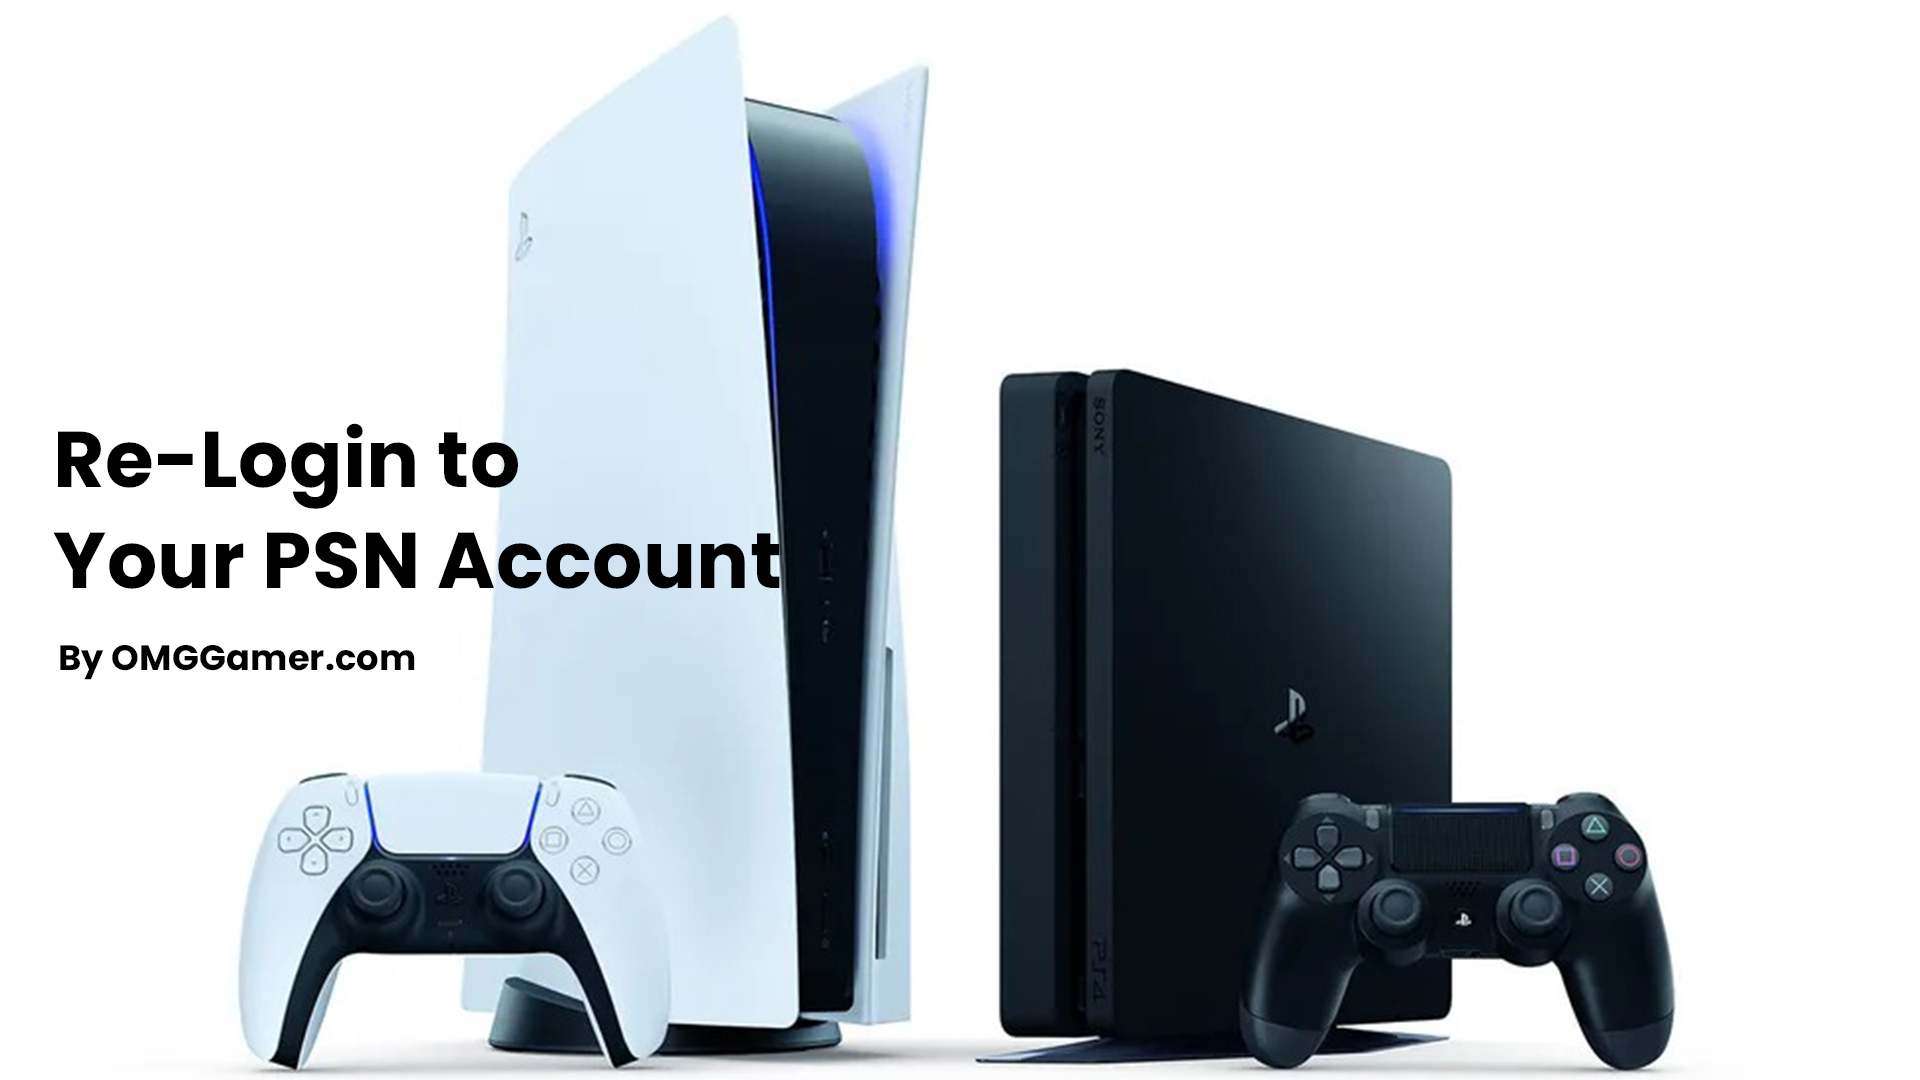 Re-Login to Your PSN Account